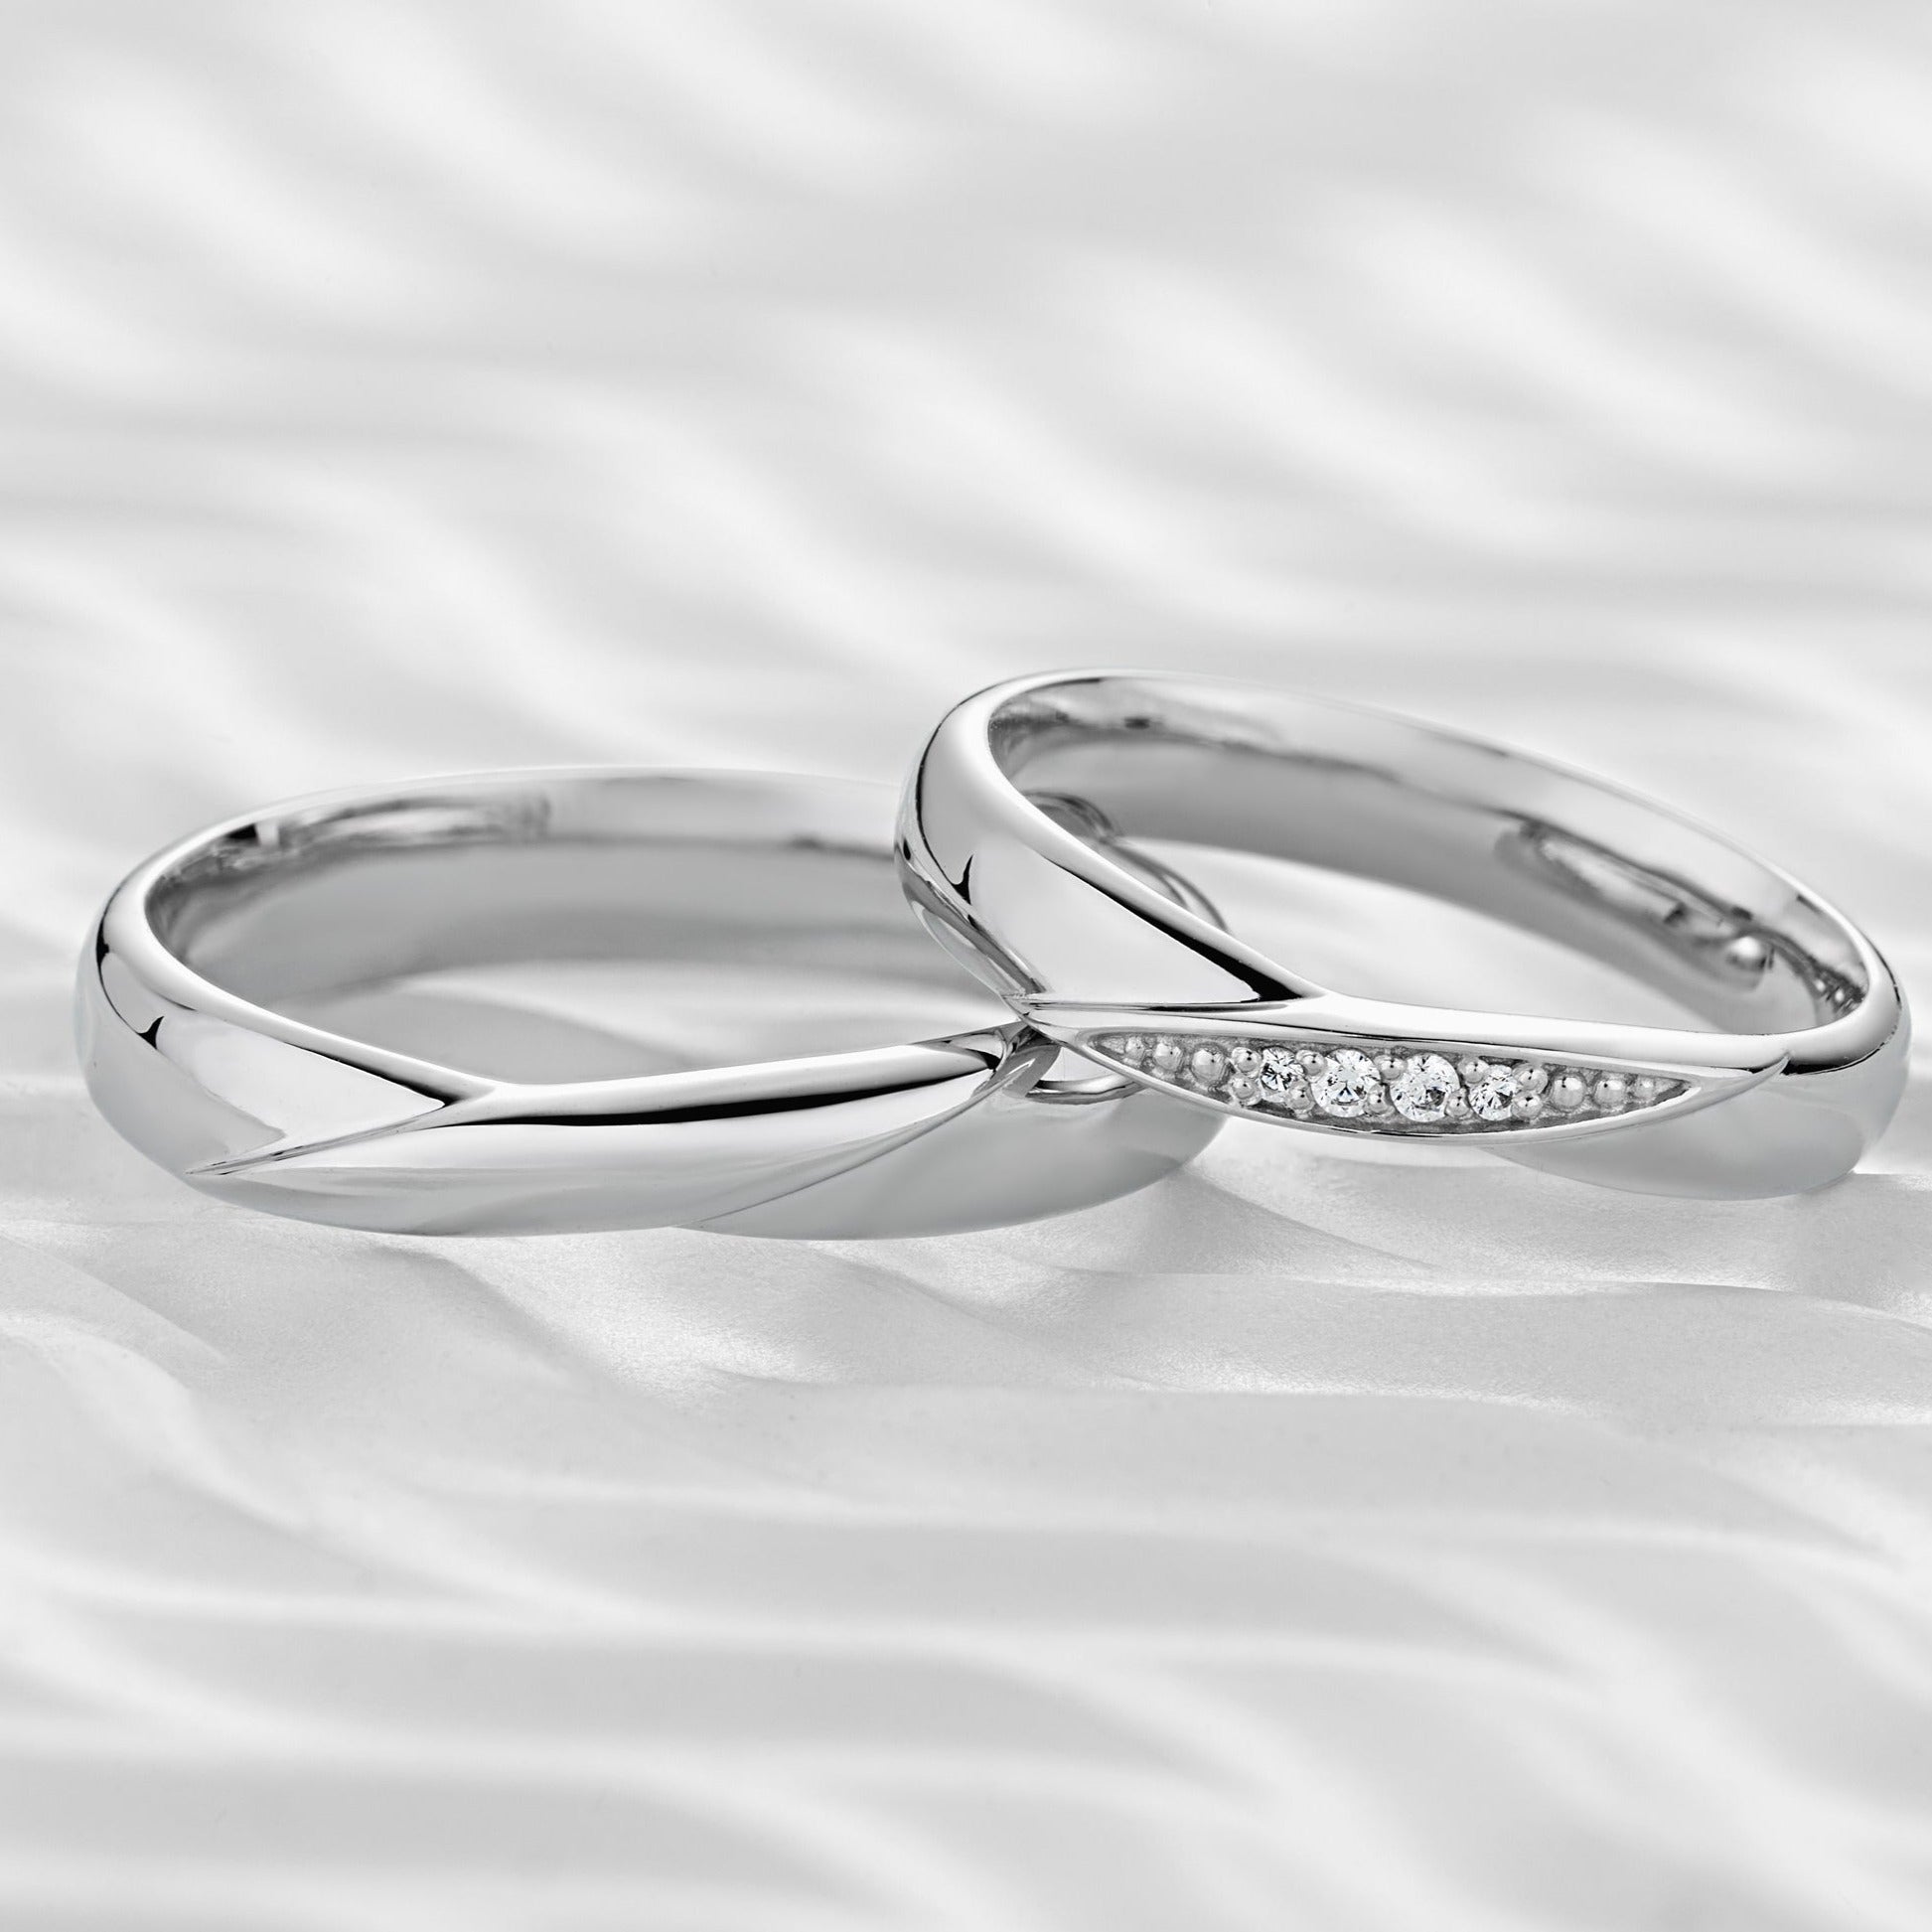 Wedding rings set with diamonds. His and hers wedding bands. Matching wedding rings. Unique gold rings. Couples wedding bands. Diamond rings. Elegant wedding bands. Twisted gold rings